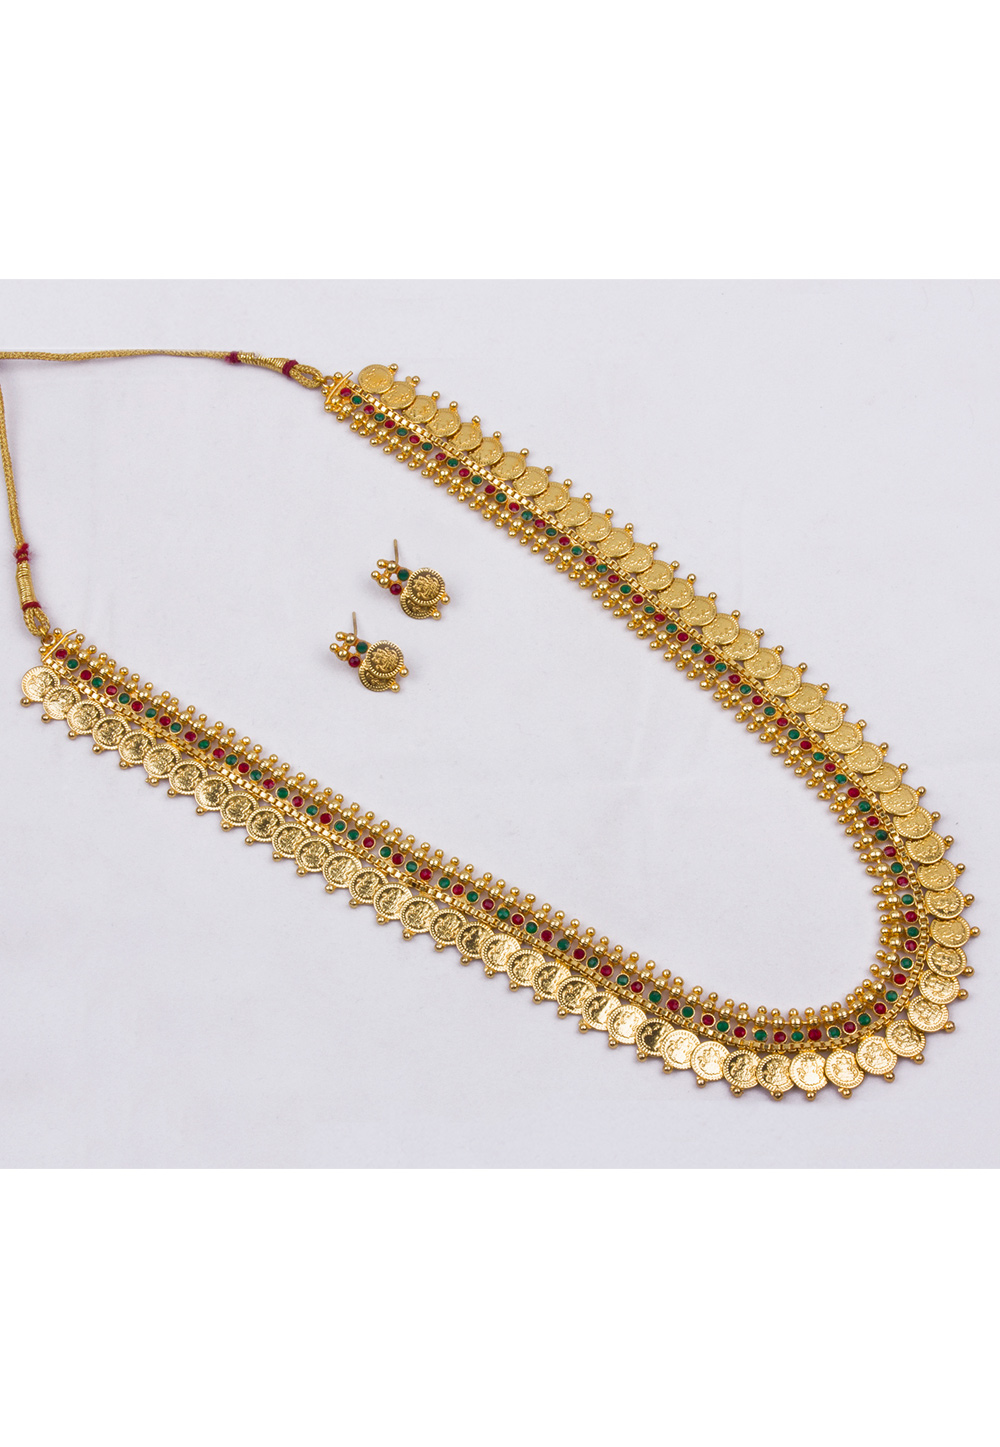 Indian Chokers Wedding Chain Jewelry Sets Gold Color Earrings For Women  African/Dubai/Arab Wedding/Party Wife Gifts